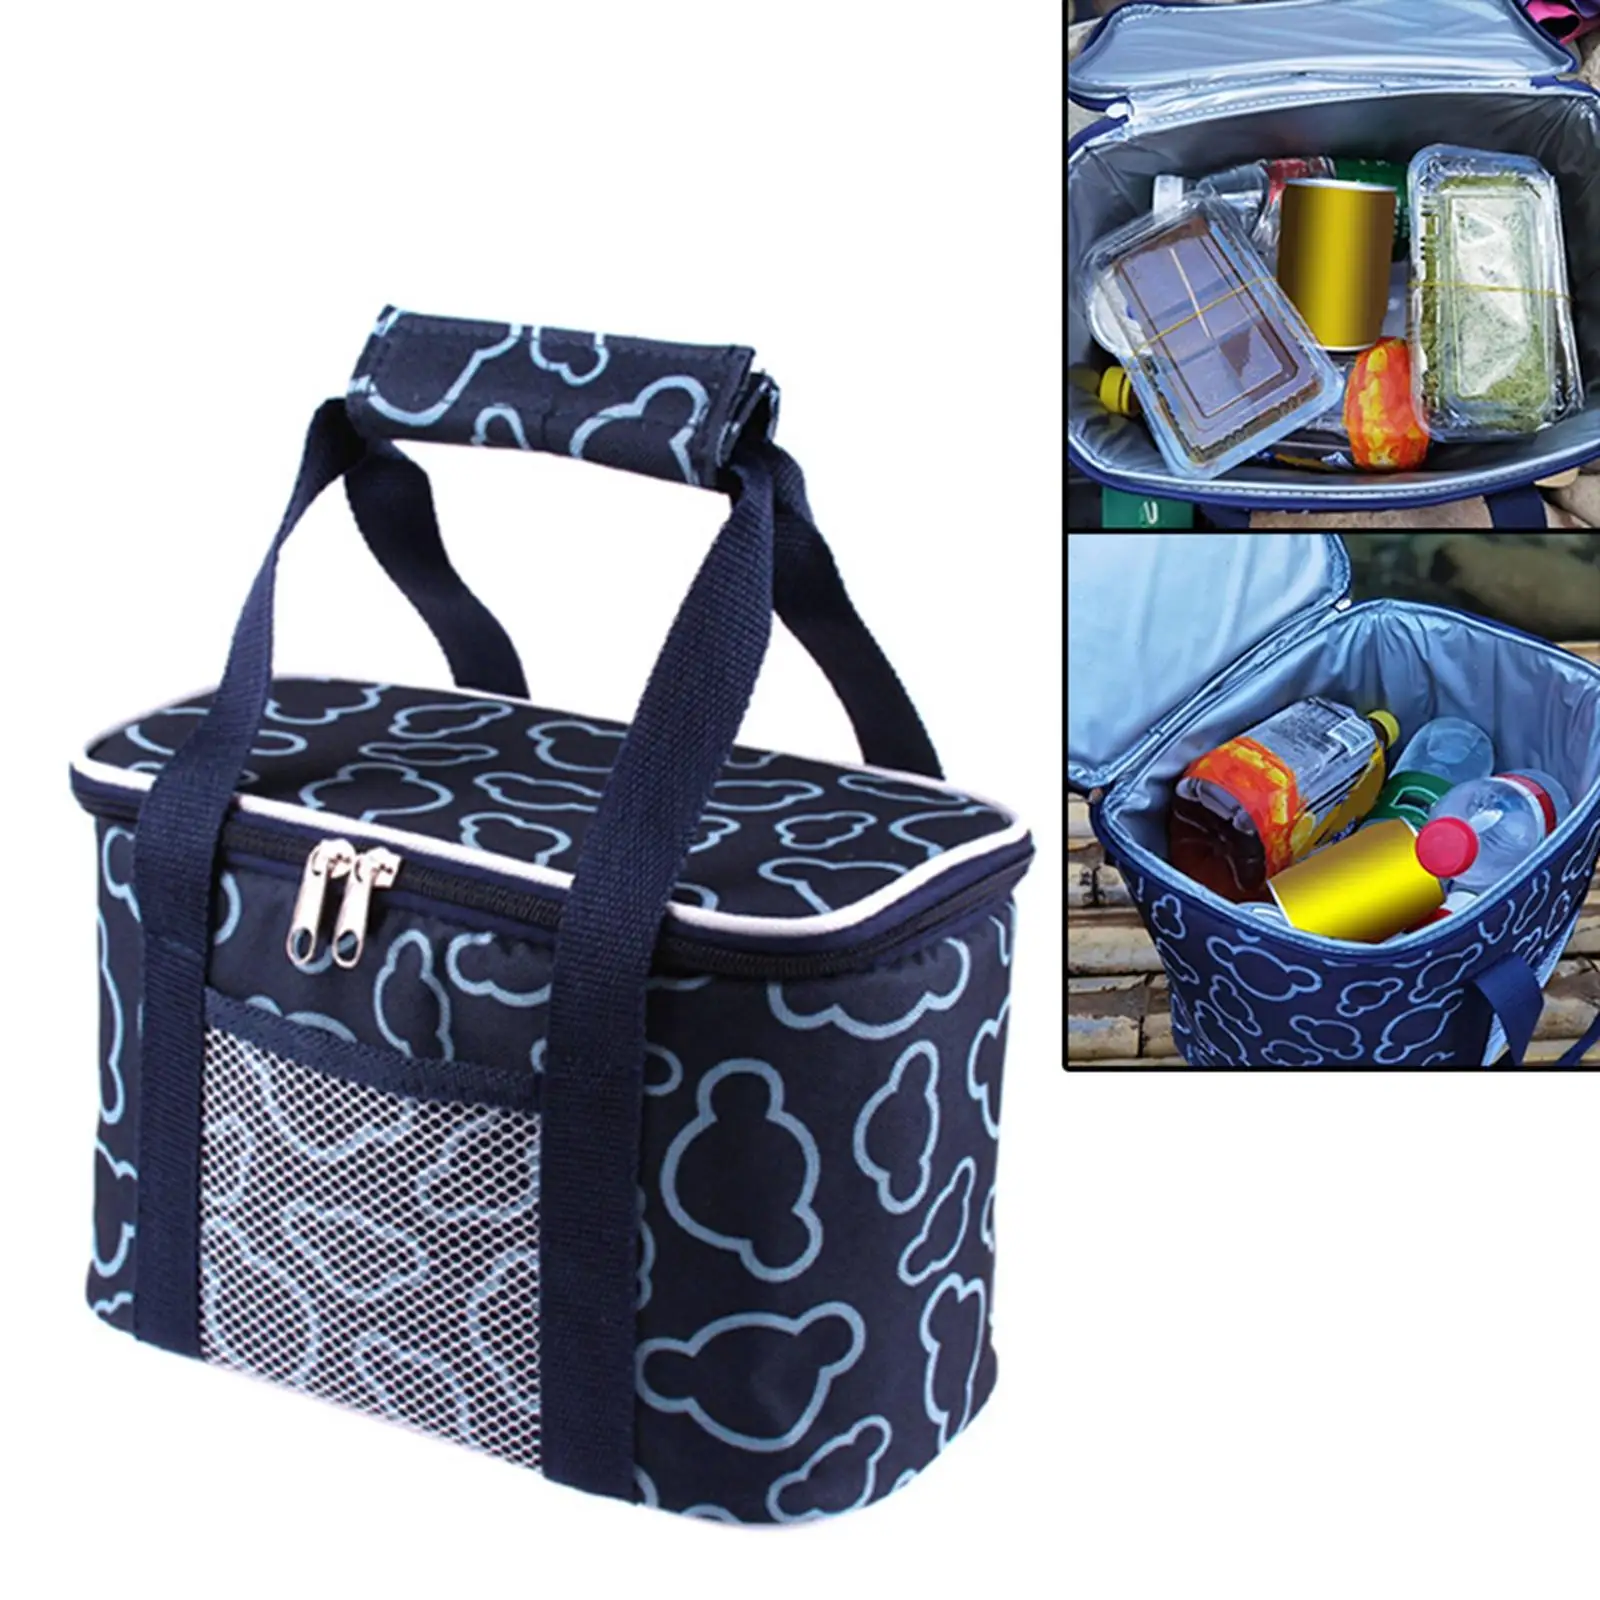 Insulated Lunch Ice Bag Lunch Box Cooler Bag Large Capacity Pouch for Outdoor Office